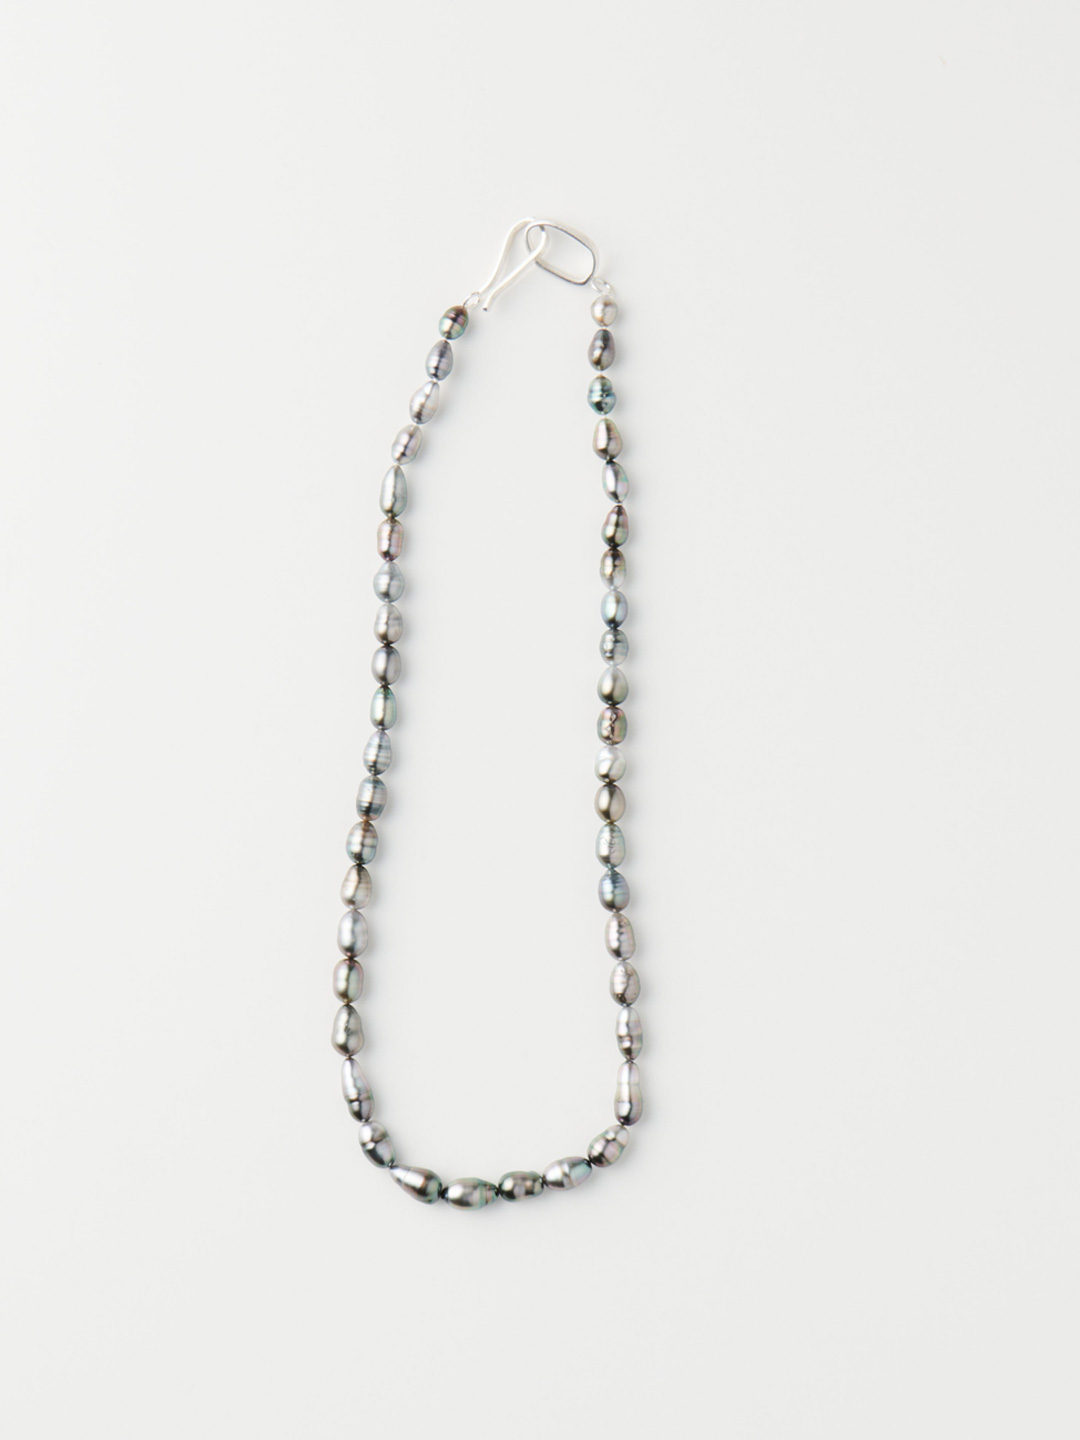 Tahitian Keshi Pearl Necklace 40cm【ESCAPERS LIMITED ITEM】